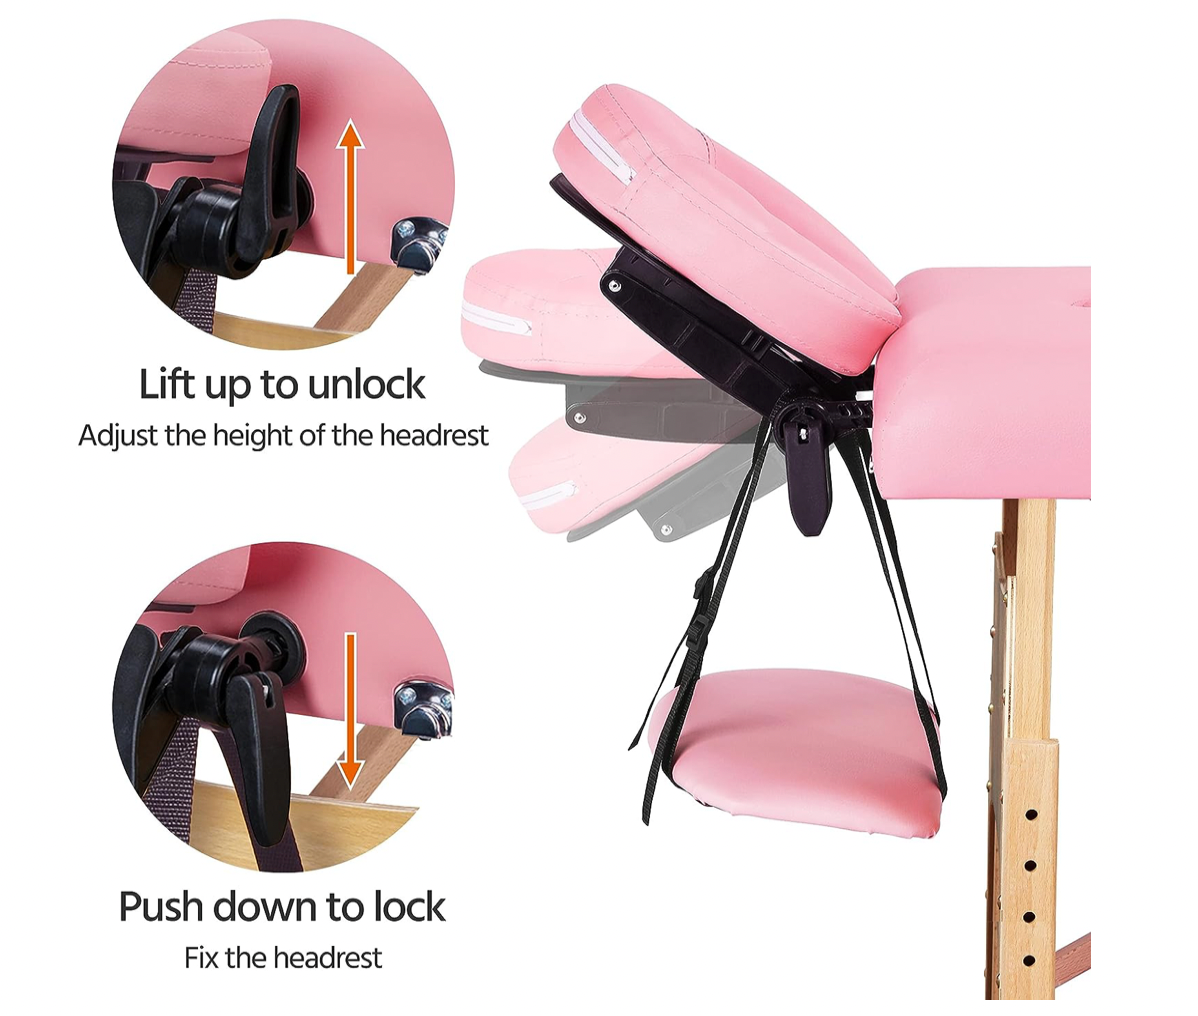 Adjustable Massage Table - LIGHT PINK | Does not ship to Puerto Rico due to the weight